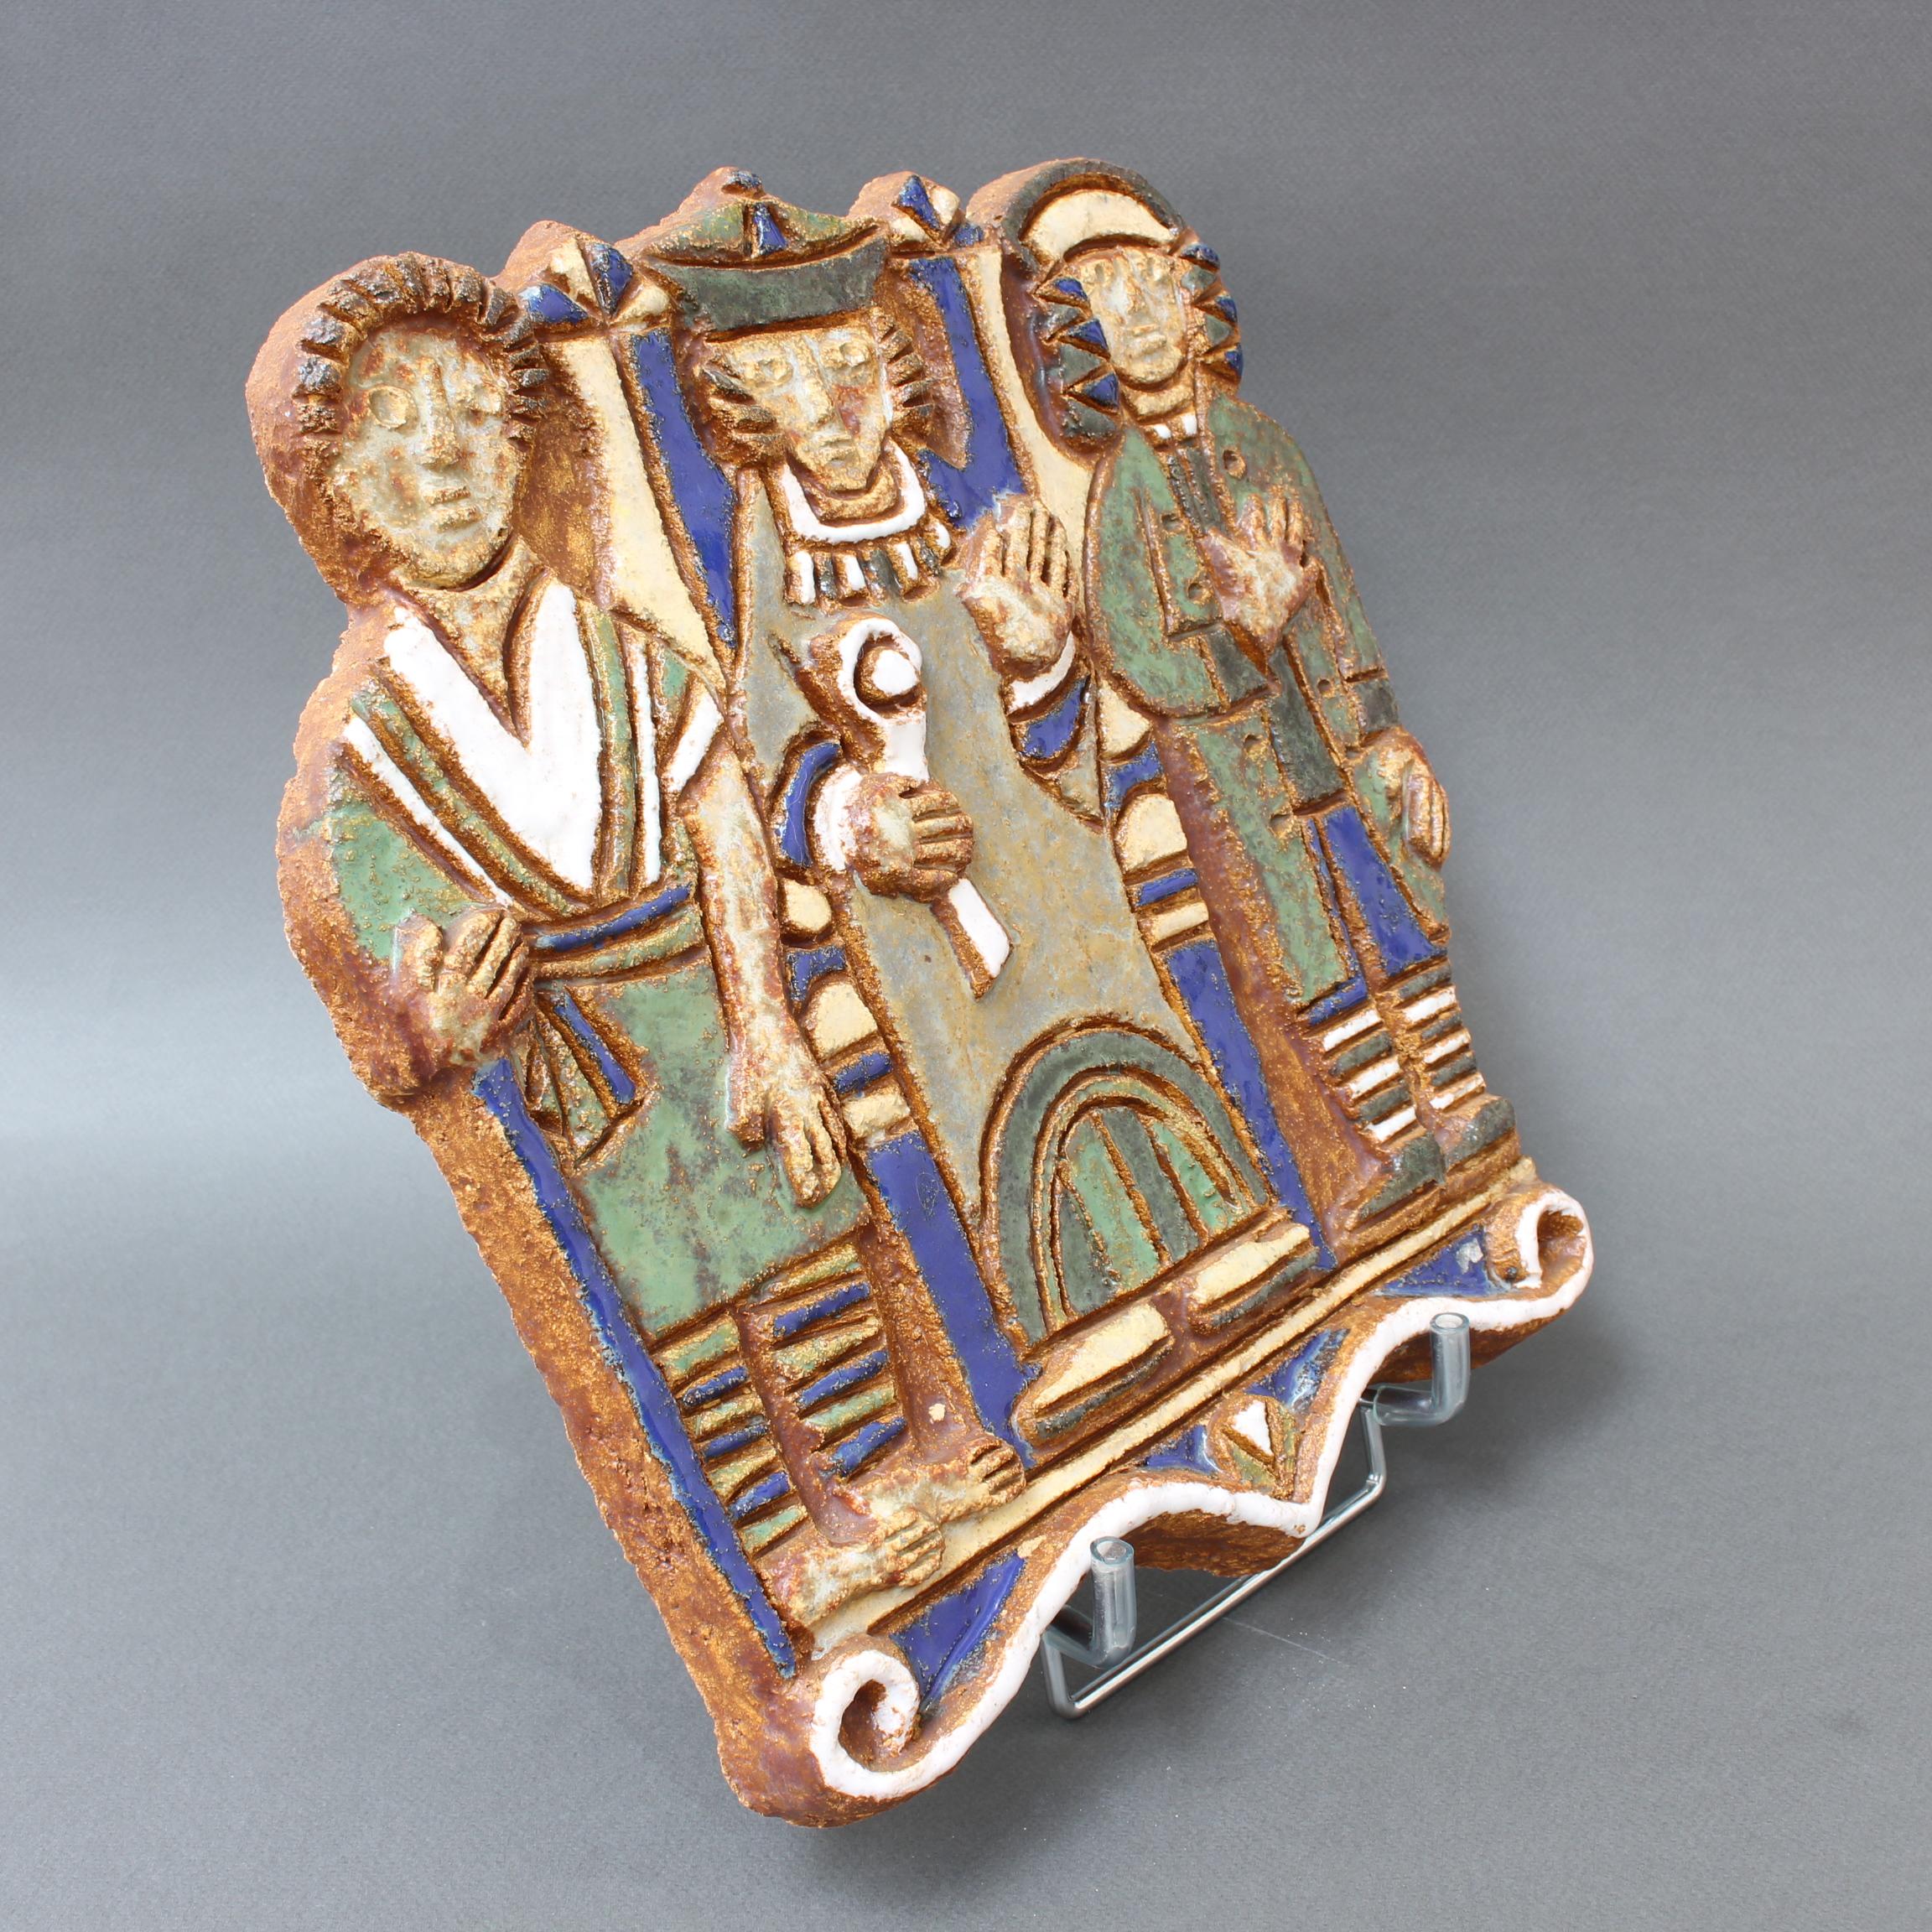 French Decorative Ceramic Wall Plaque with Three Figures by Les Argonautes 1960s For Sale 1